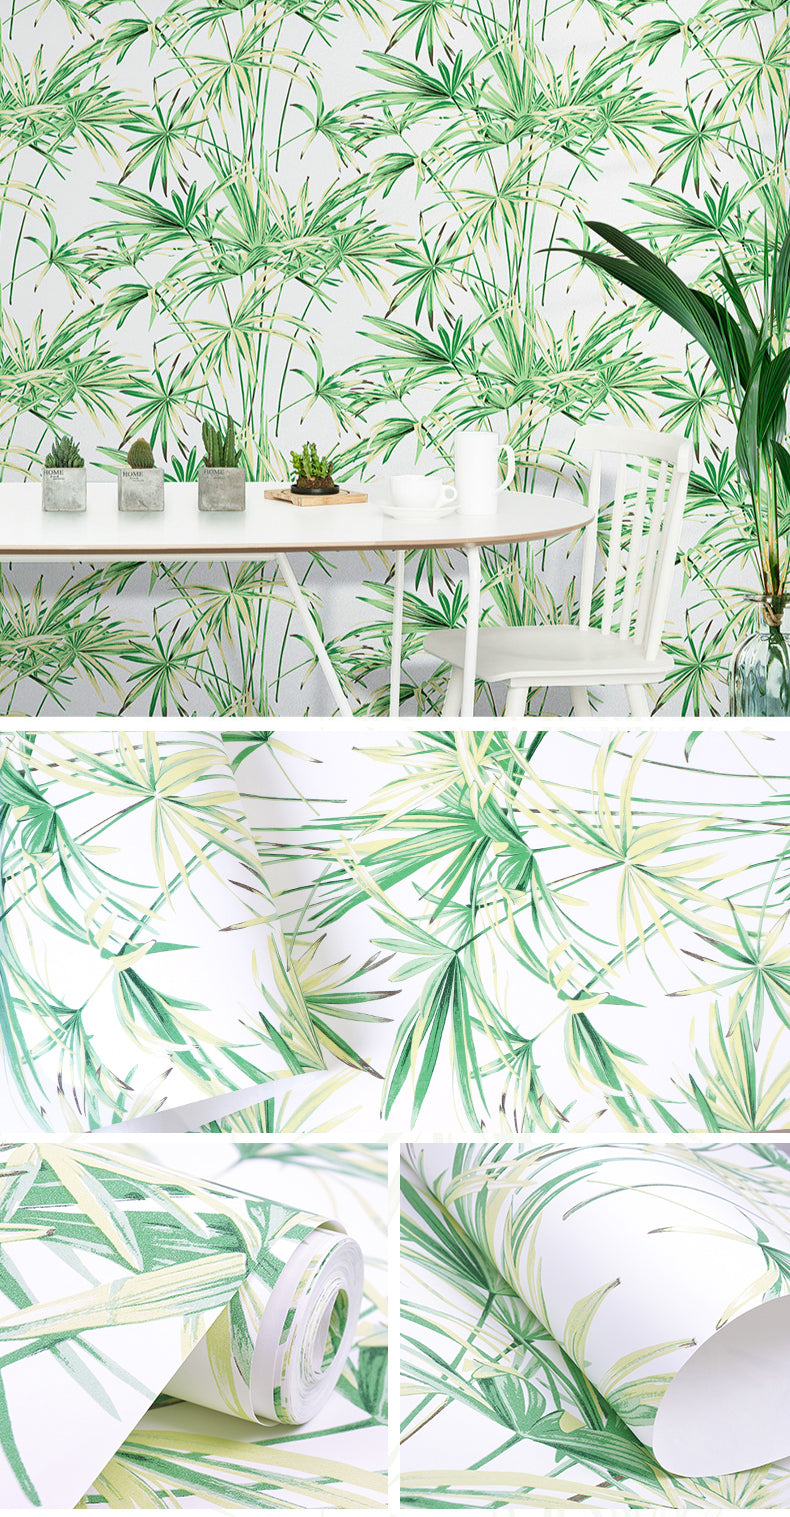 Tropical Botany Bamboo Palm Leaves Wallpaper Green Leaves Nordic Style Wallpaper For Living Room Dining Room Kitchen Decor (10mtr Roll)